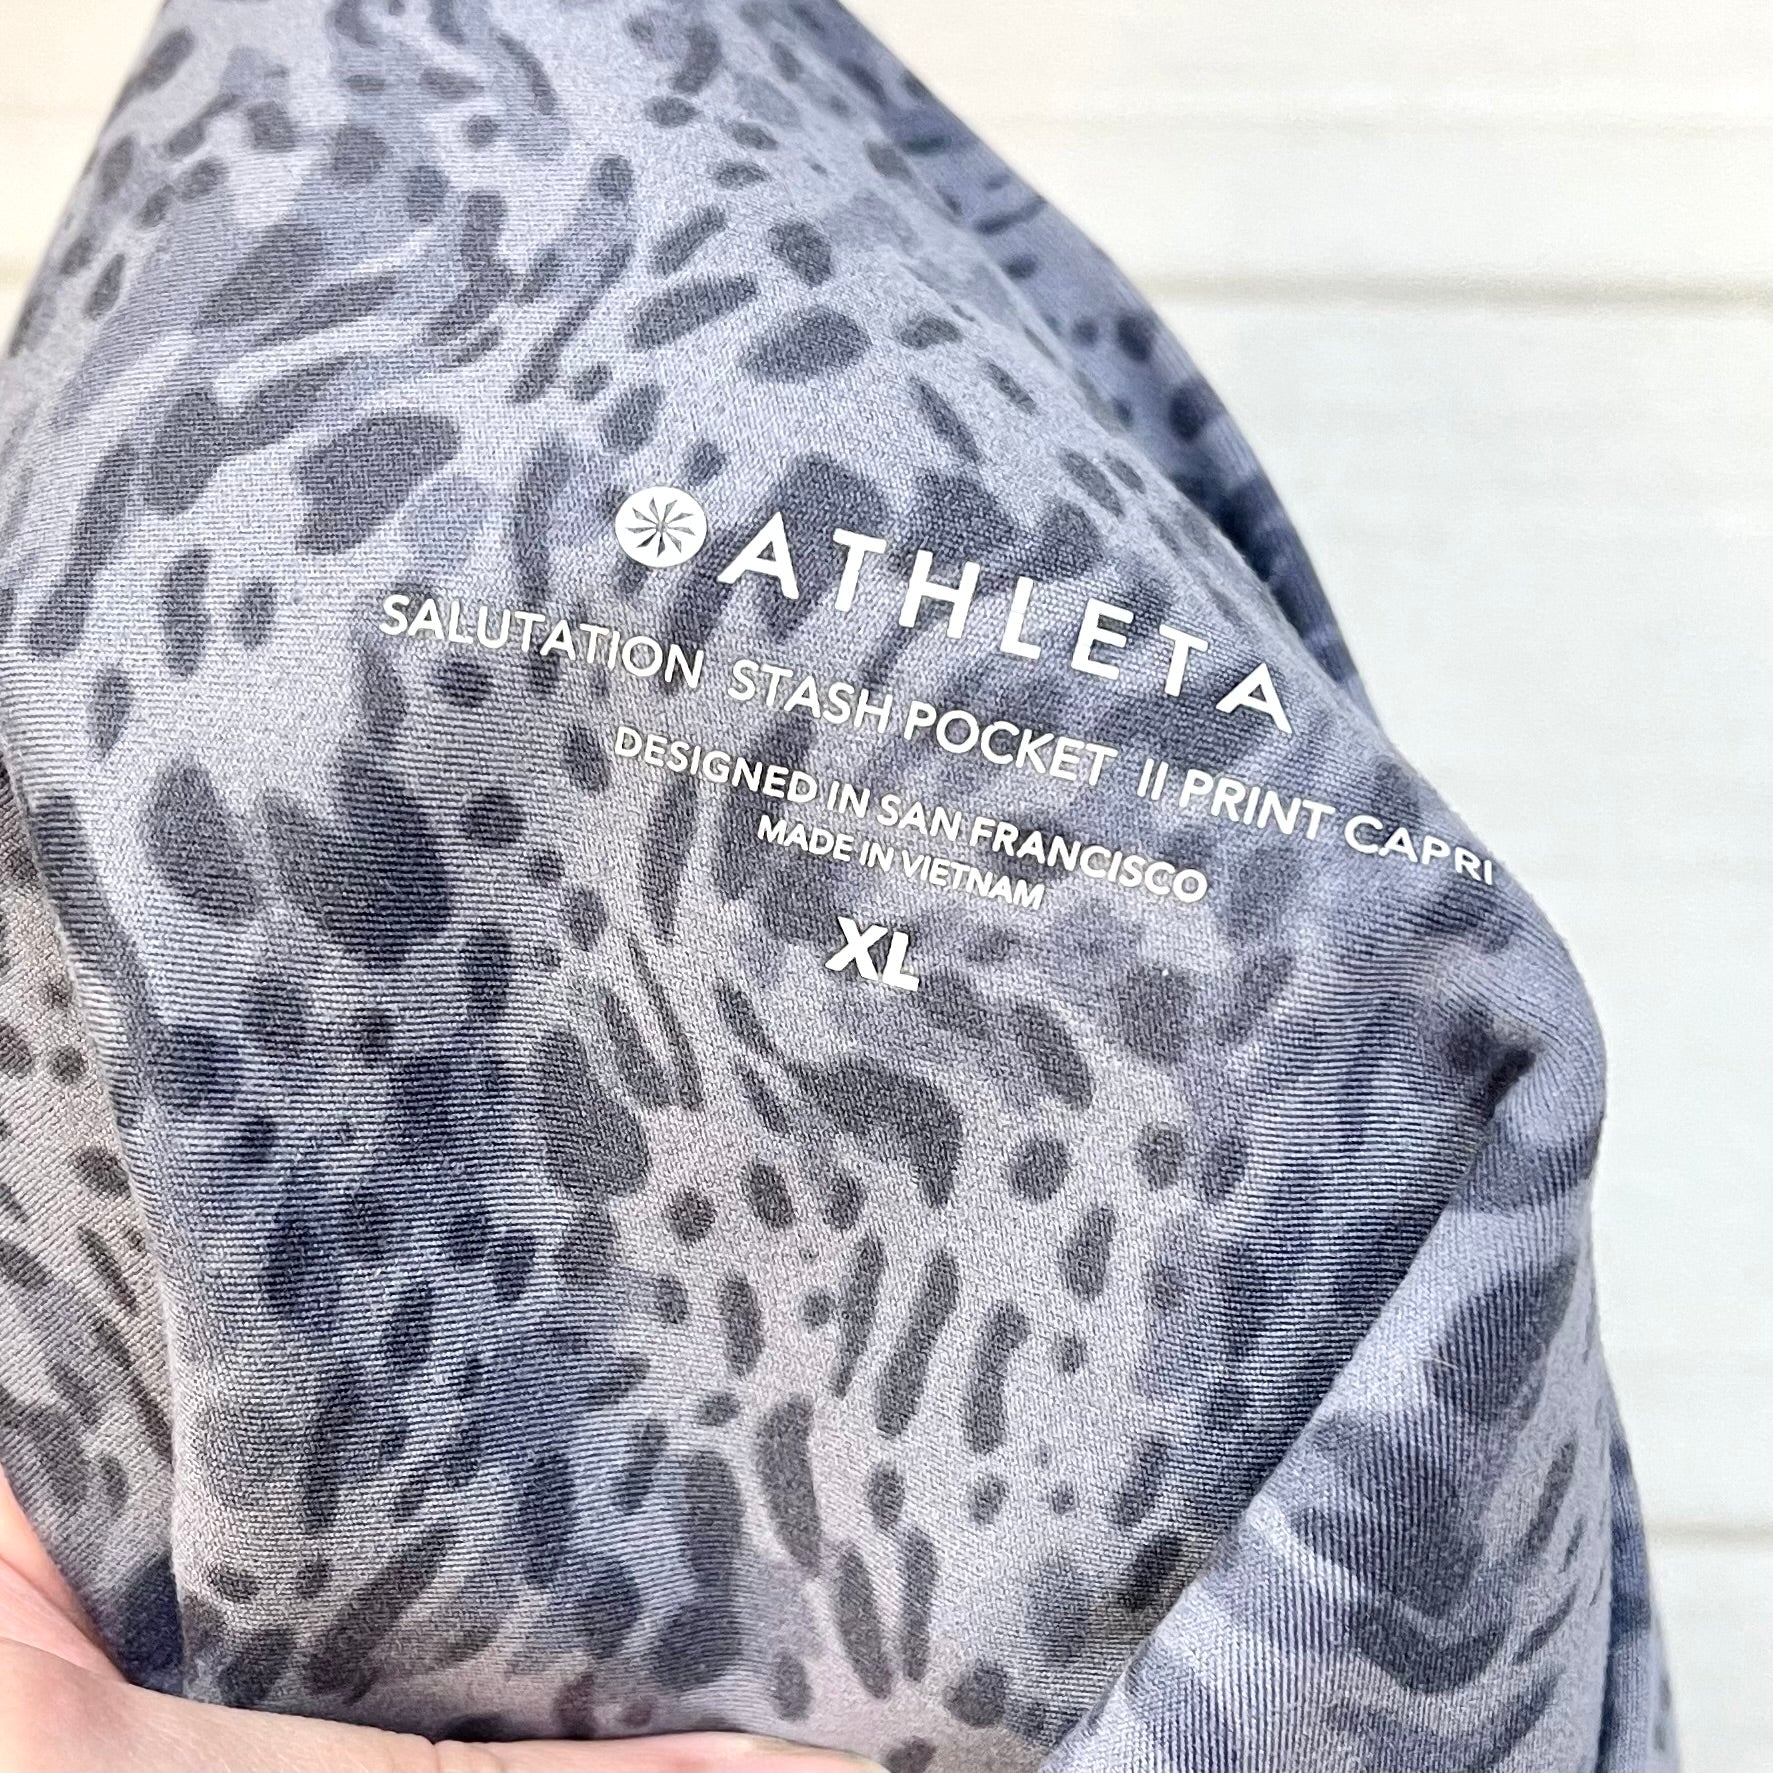 Athletic Leggings By Athleta Size: M – Clothes Mentor West Chester PA #178